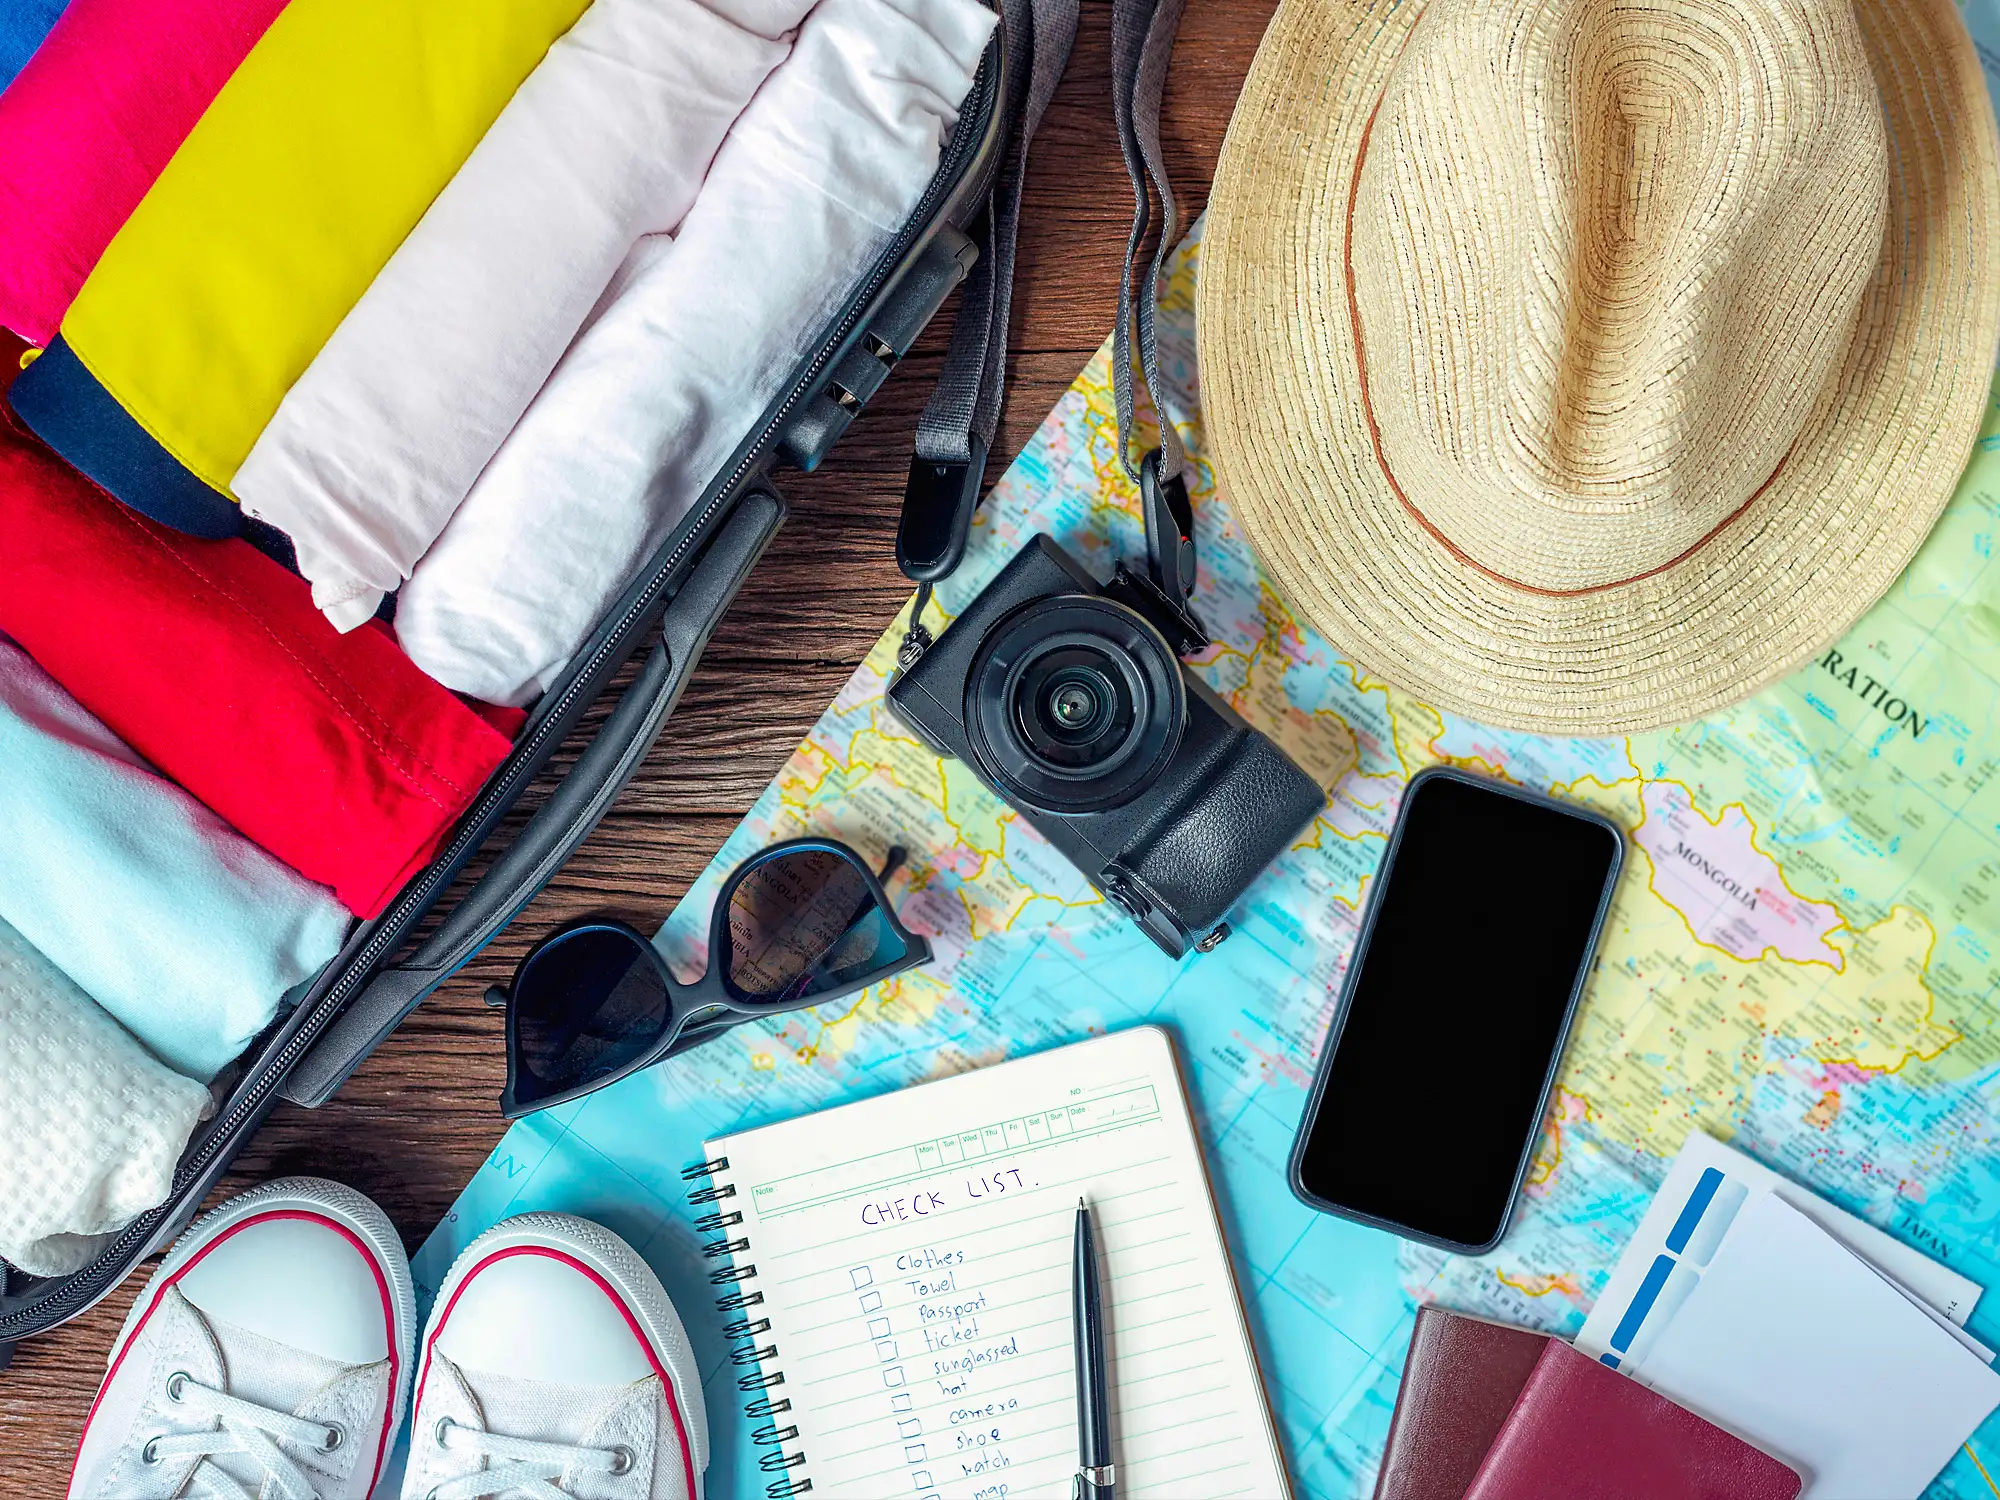 18 Travel Essentials To Pack That Will Save You Space, Time